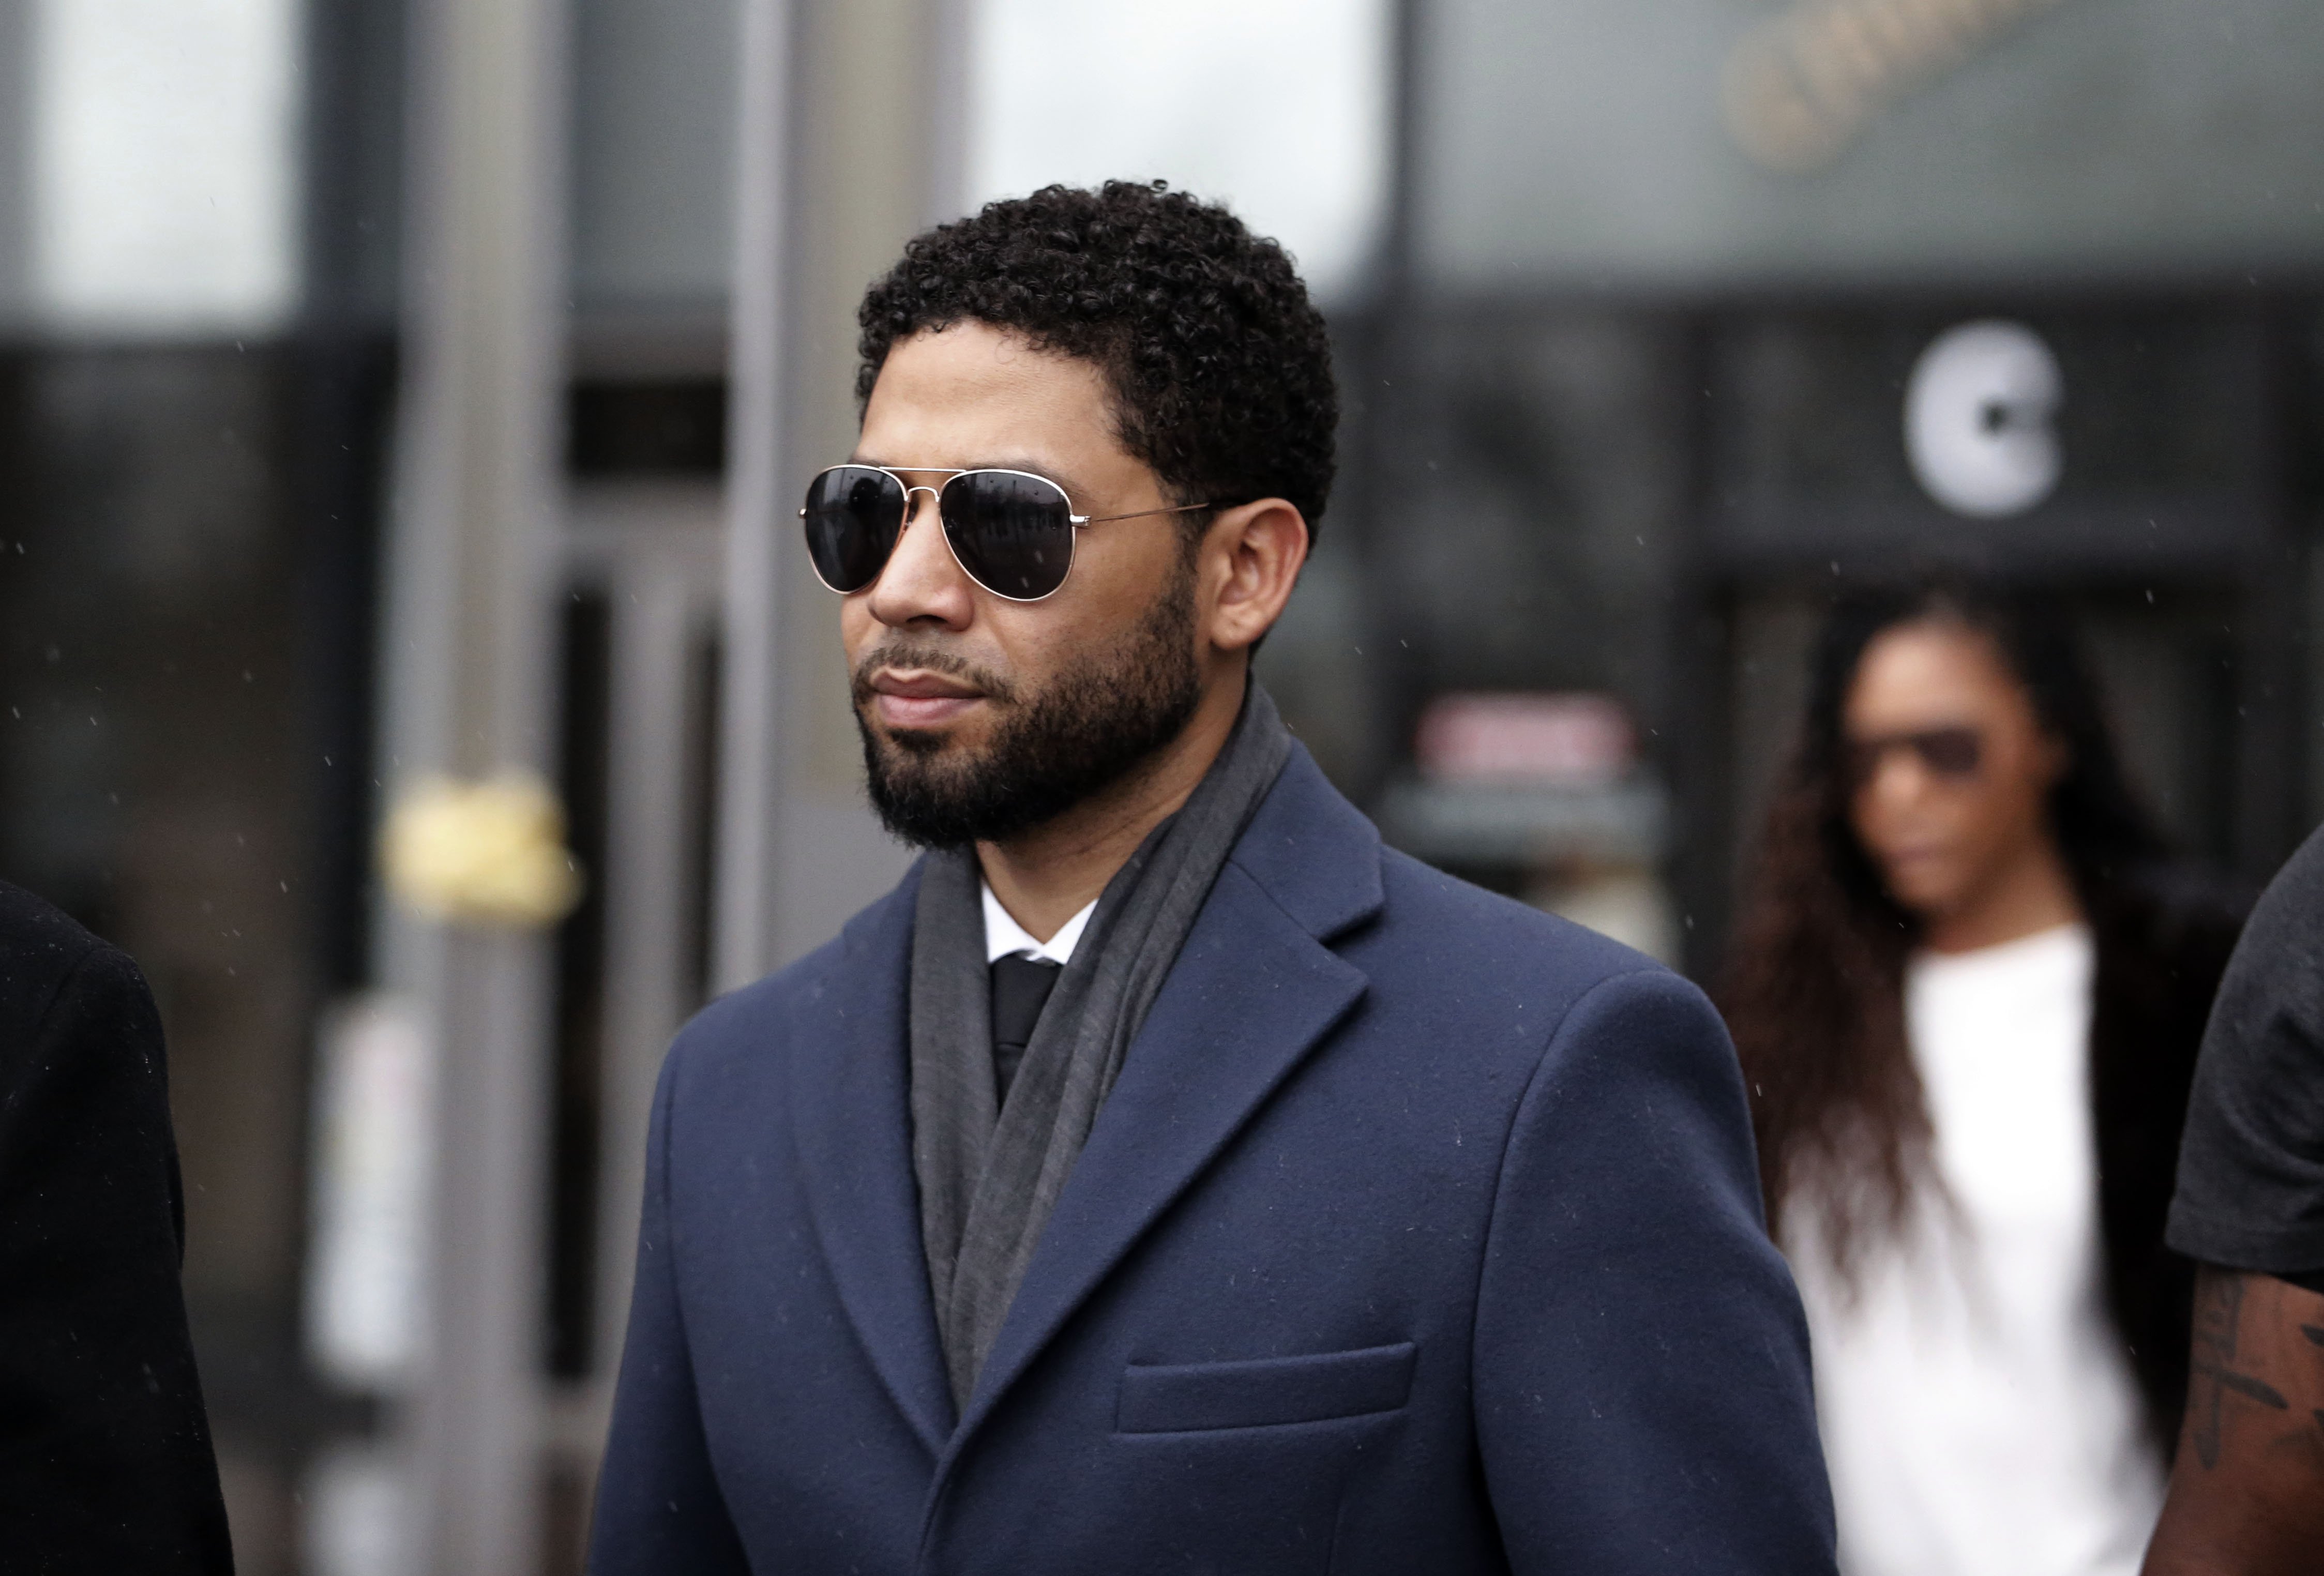 Jussie Smollett leaves Leighton Criminal Courthouse after his court appearance on March 14, 2019. | Photo: GettyImages